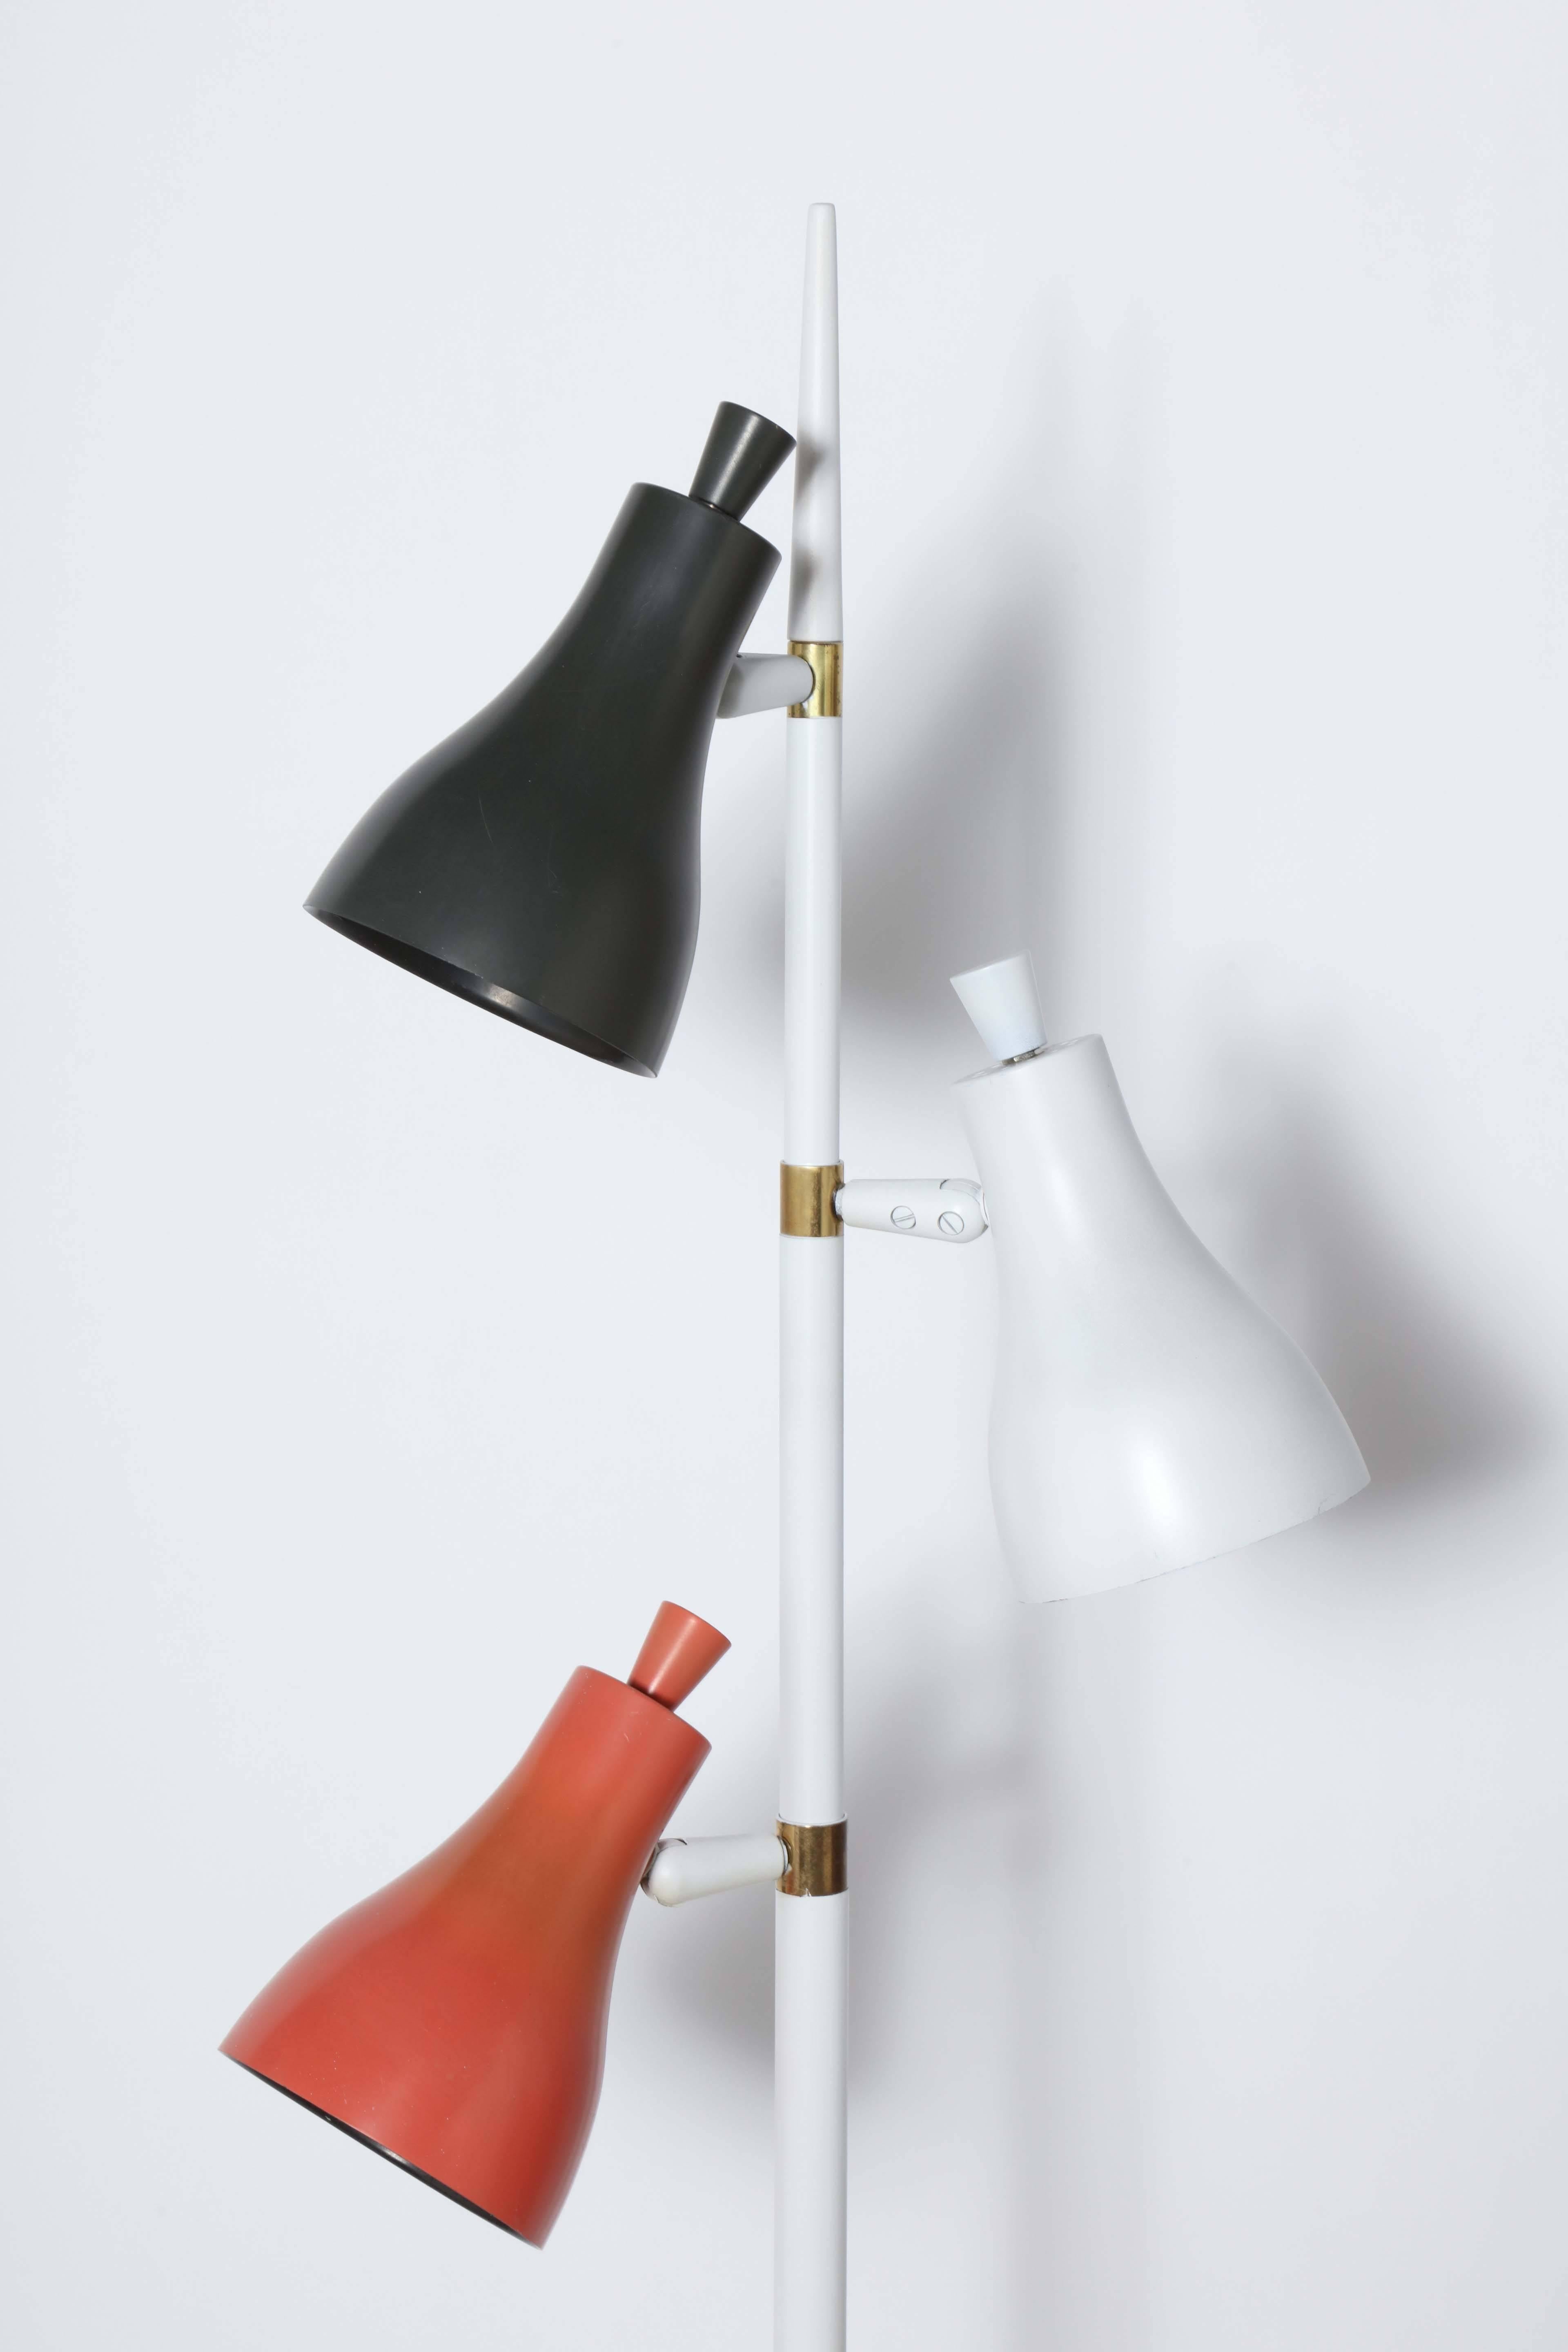 1950's Gerald Thurston for Lightolier adjustable Tri Color, Tri Shade Floor Lamp. Featuring Three adjustable enameled Shades in Black, White and Pale Salmon, adjustable White tubular stem with Brass details, on a round 11D White base. Versatile.